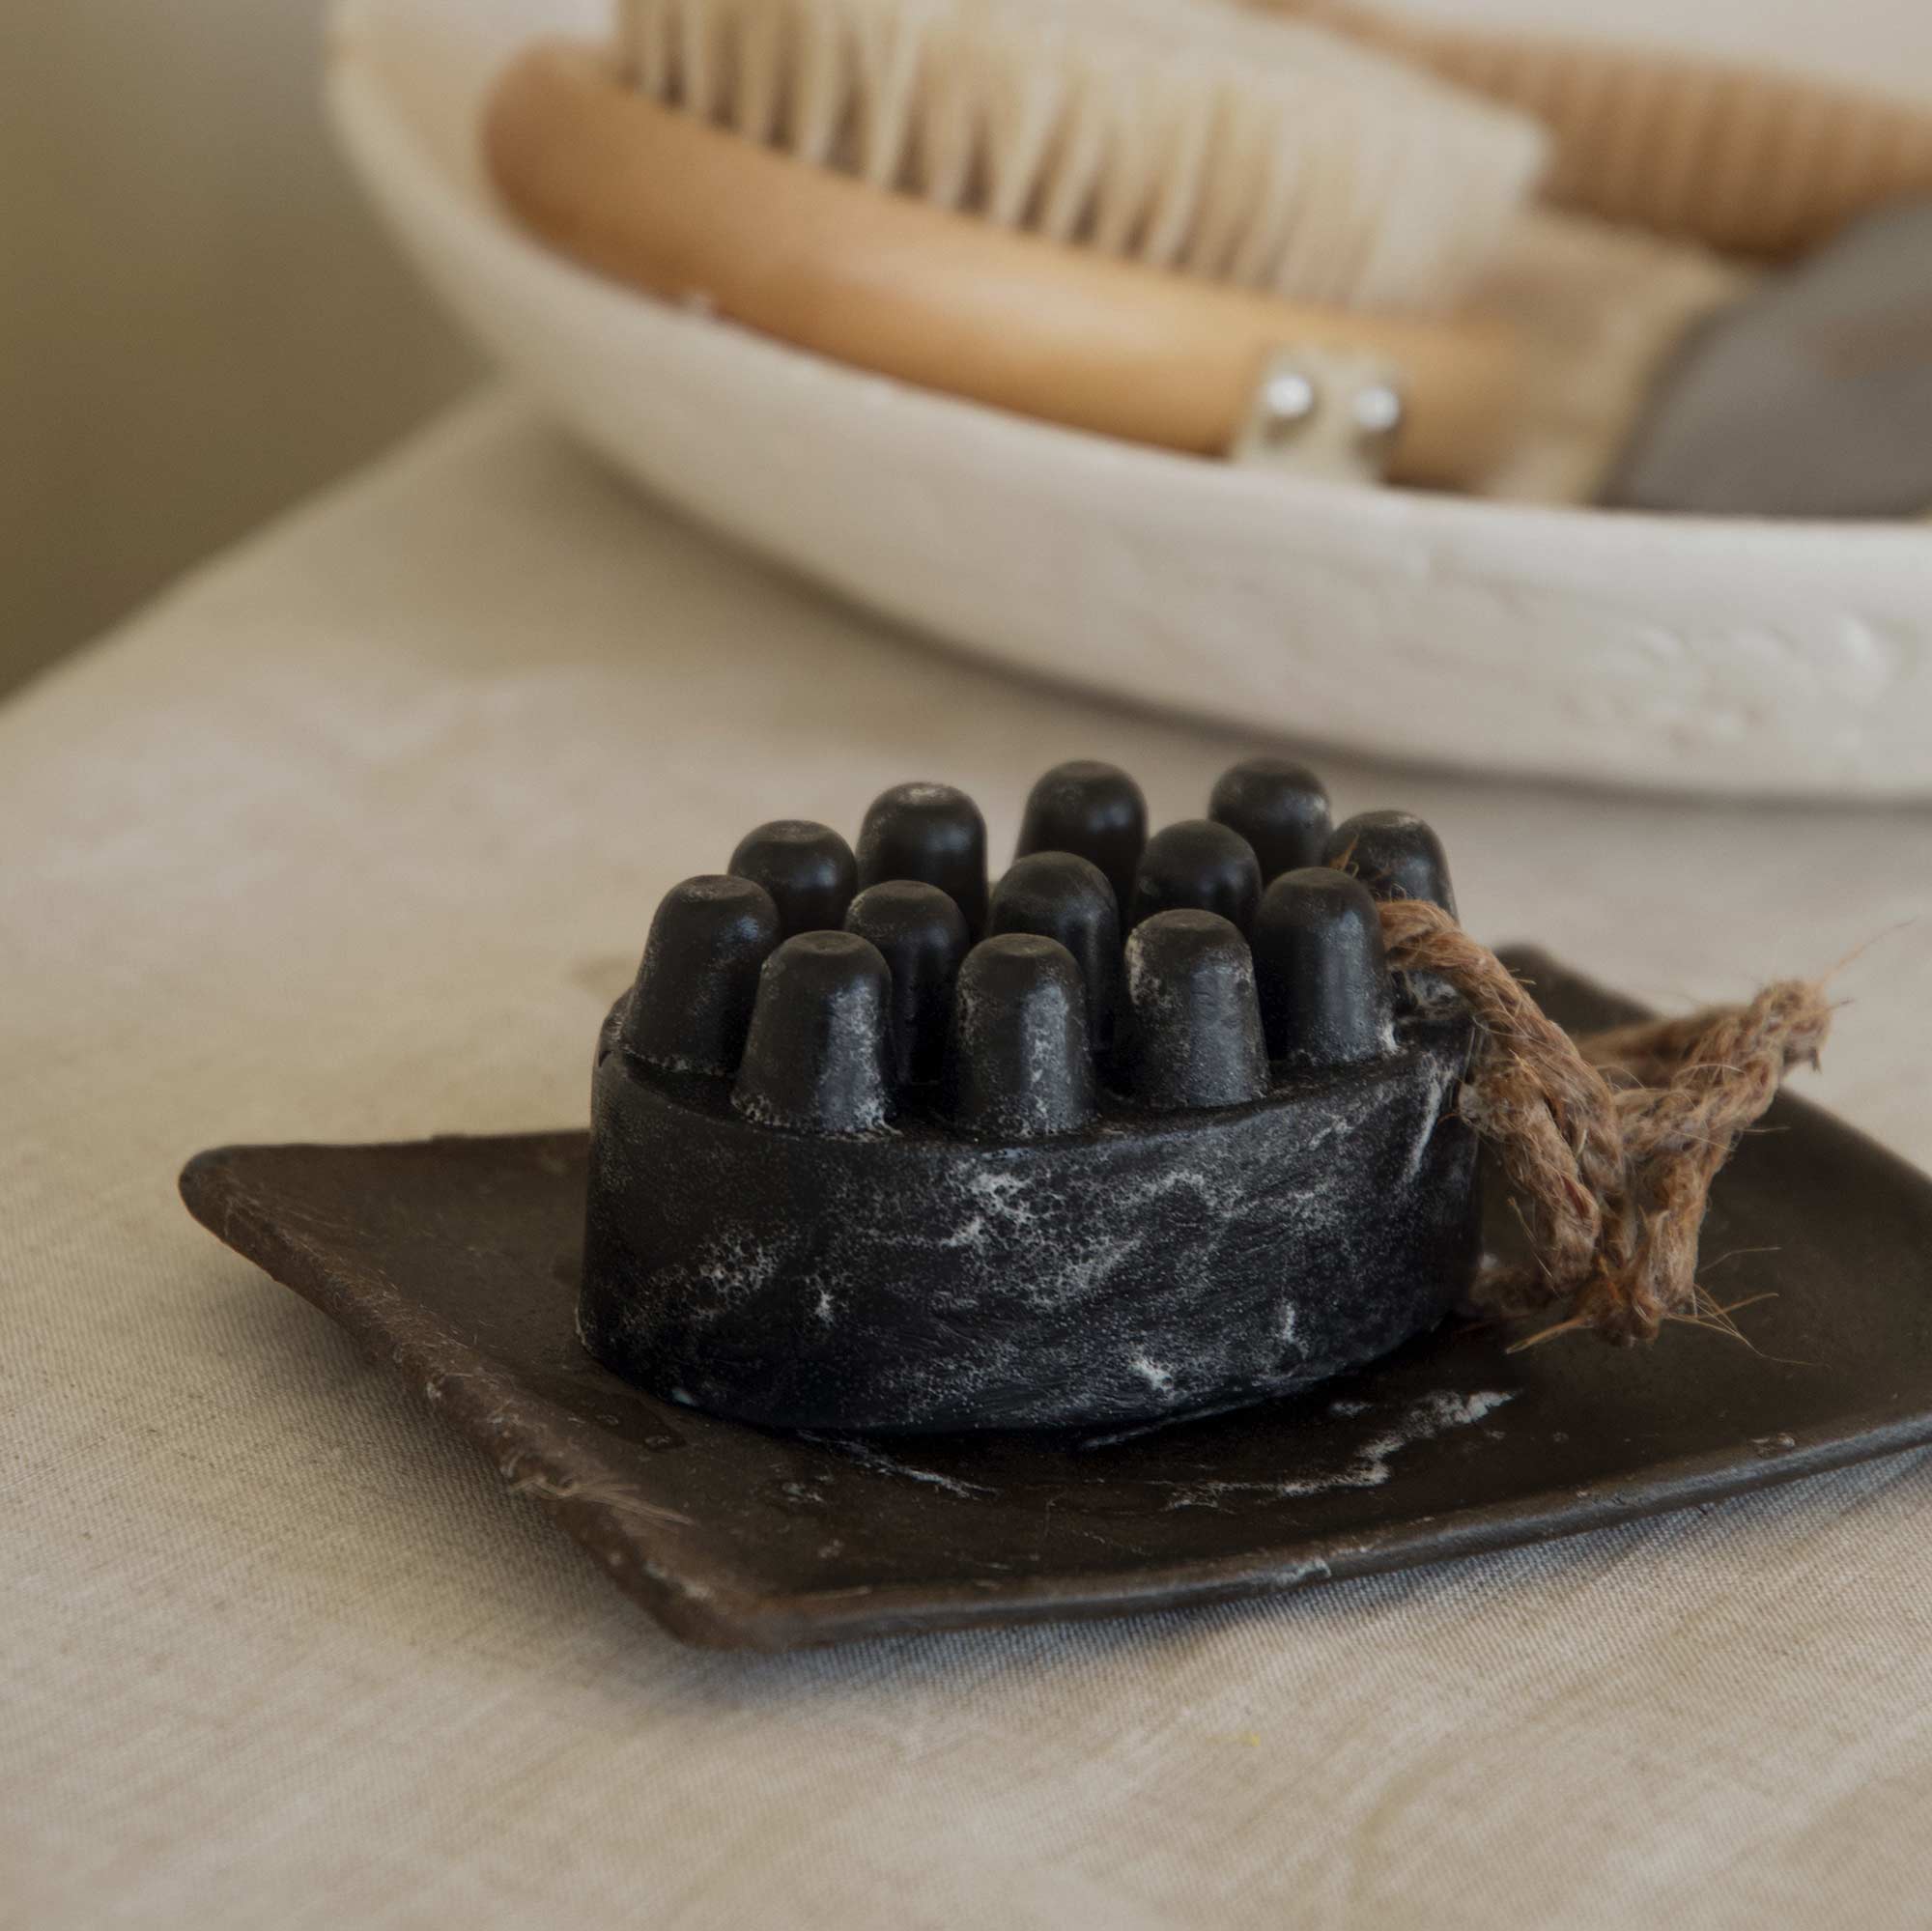 palo santo charcoal bar soap with a plate in the bathroom